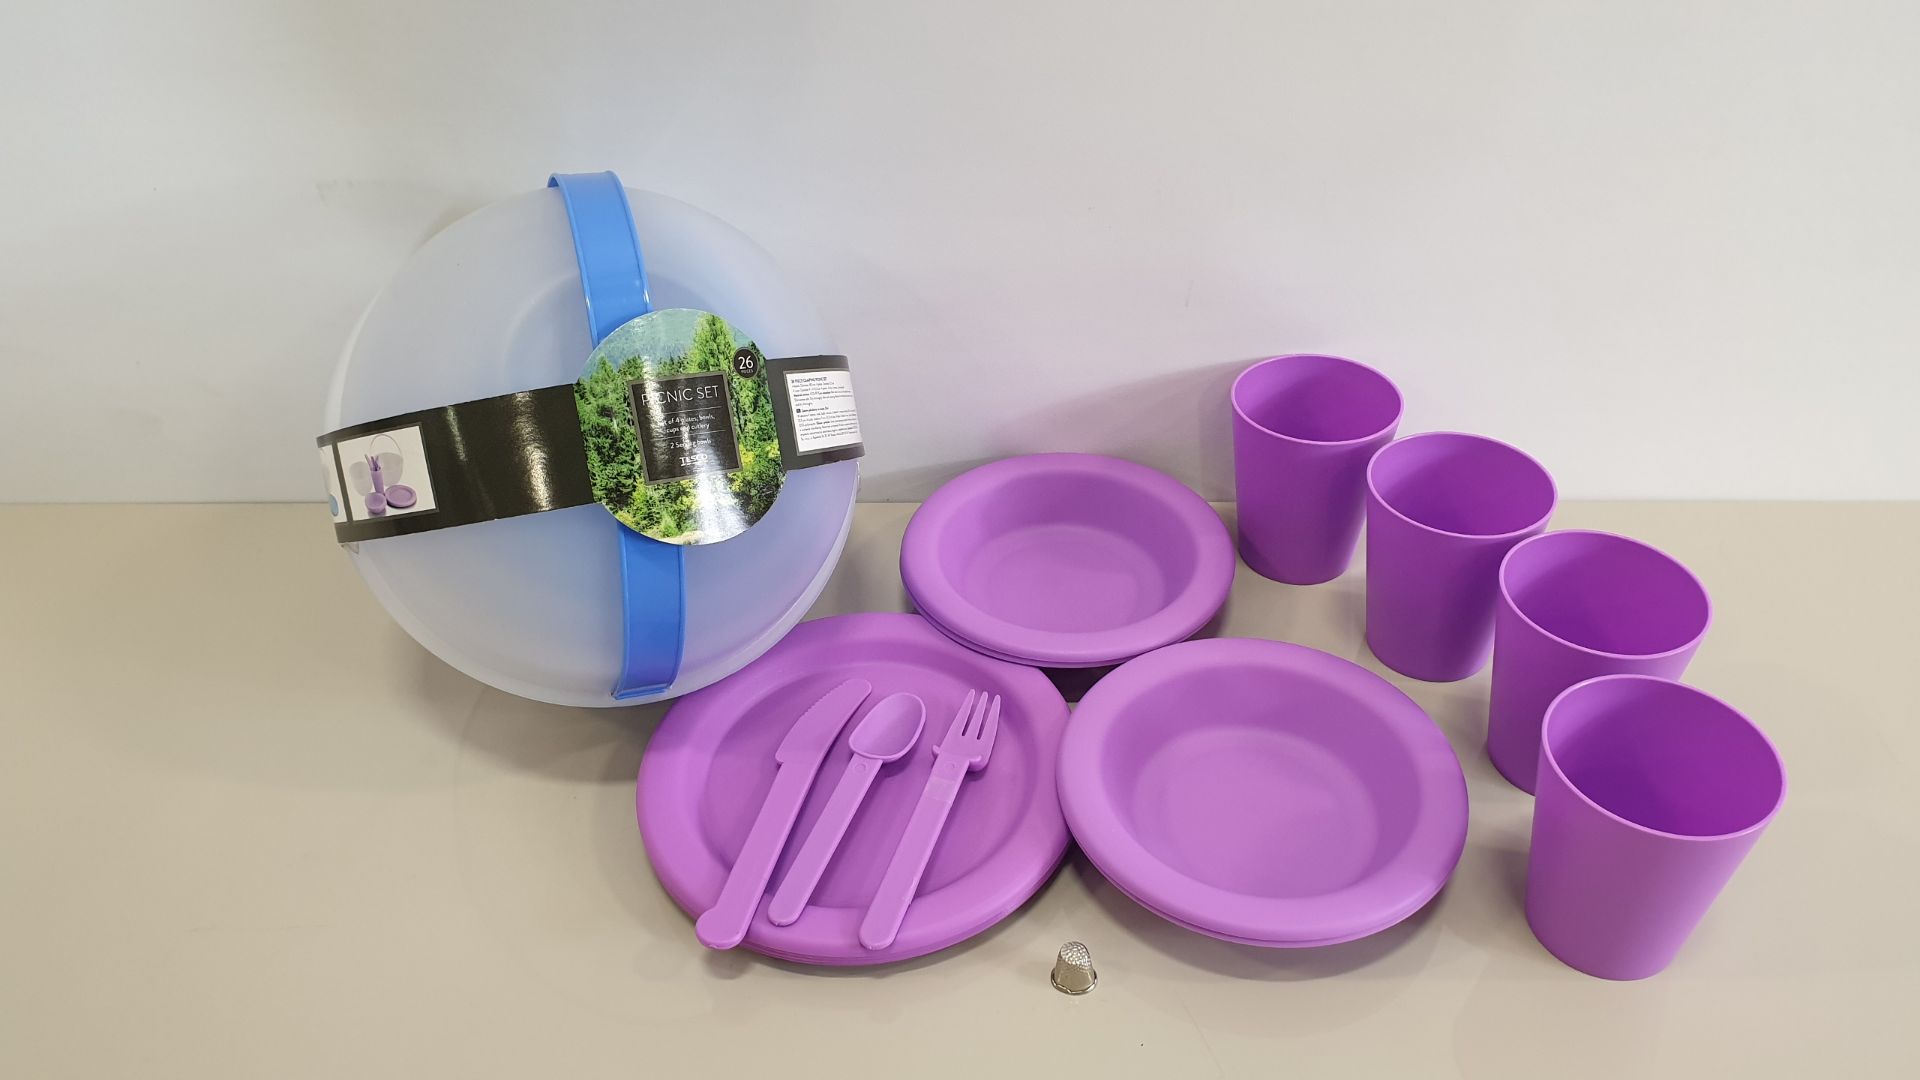 16 X 26 PC PICNIC / CAMPING SETS (IE. 4 CUPS, 4 PLATES, 4 BOWLS, 4 X 3 PC CUTLERY PLUS 2 BOWLS) - IN